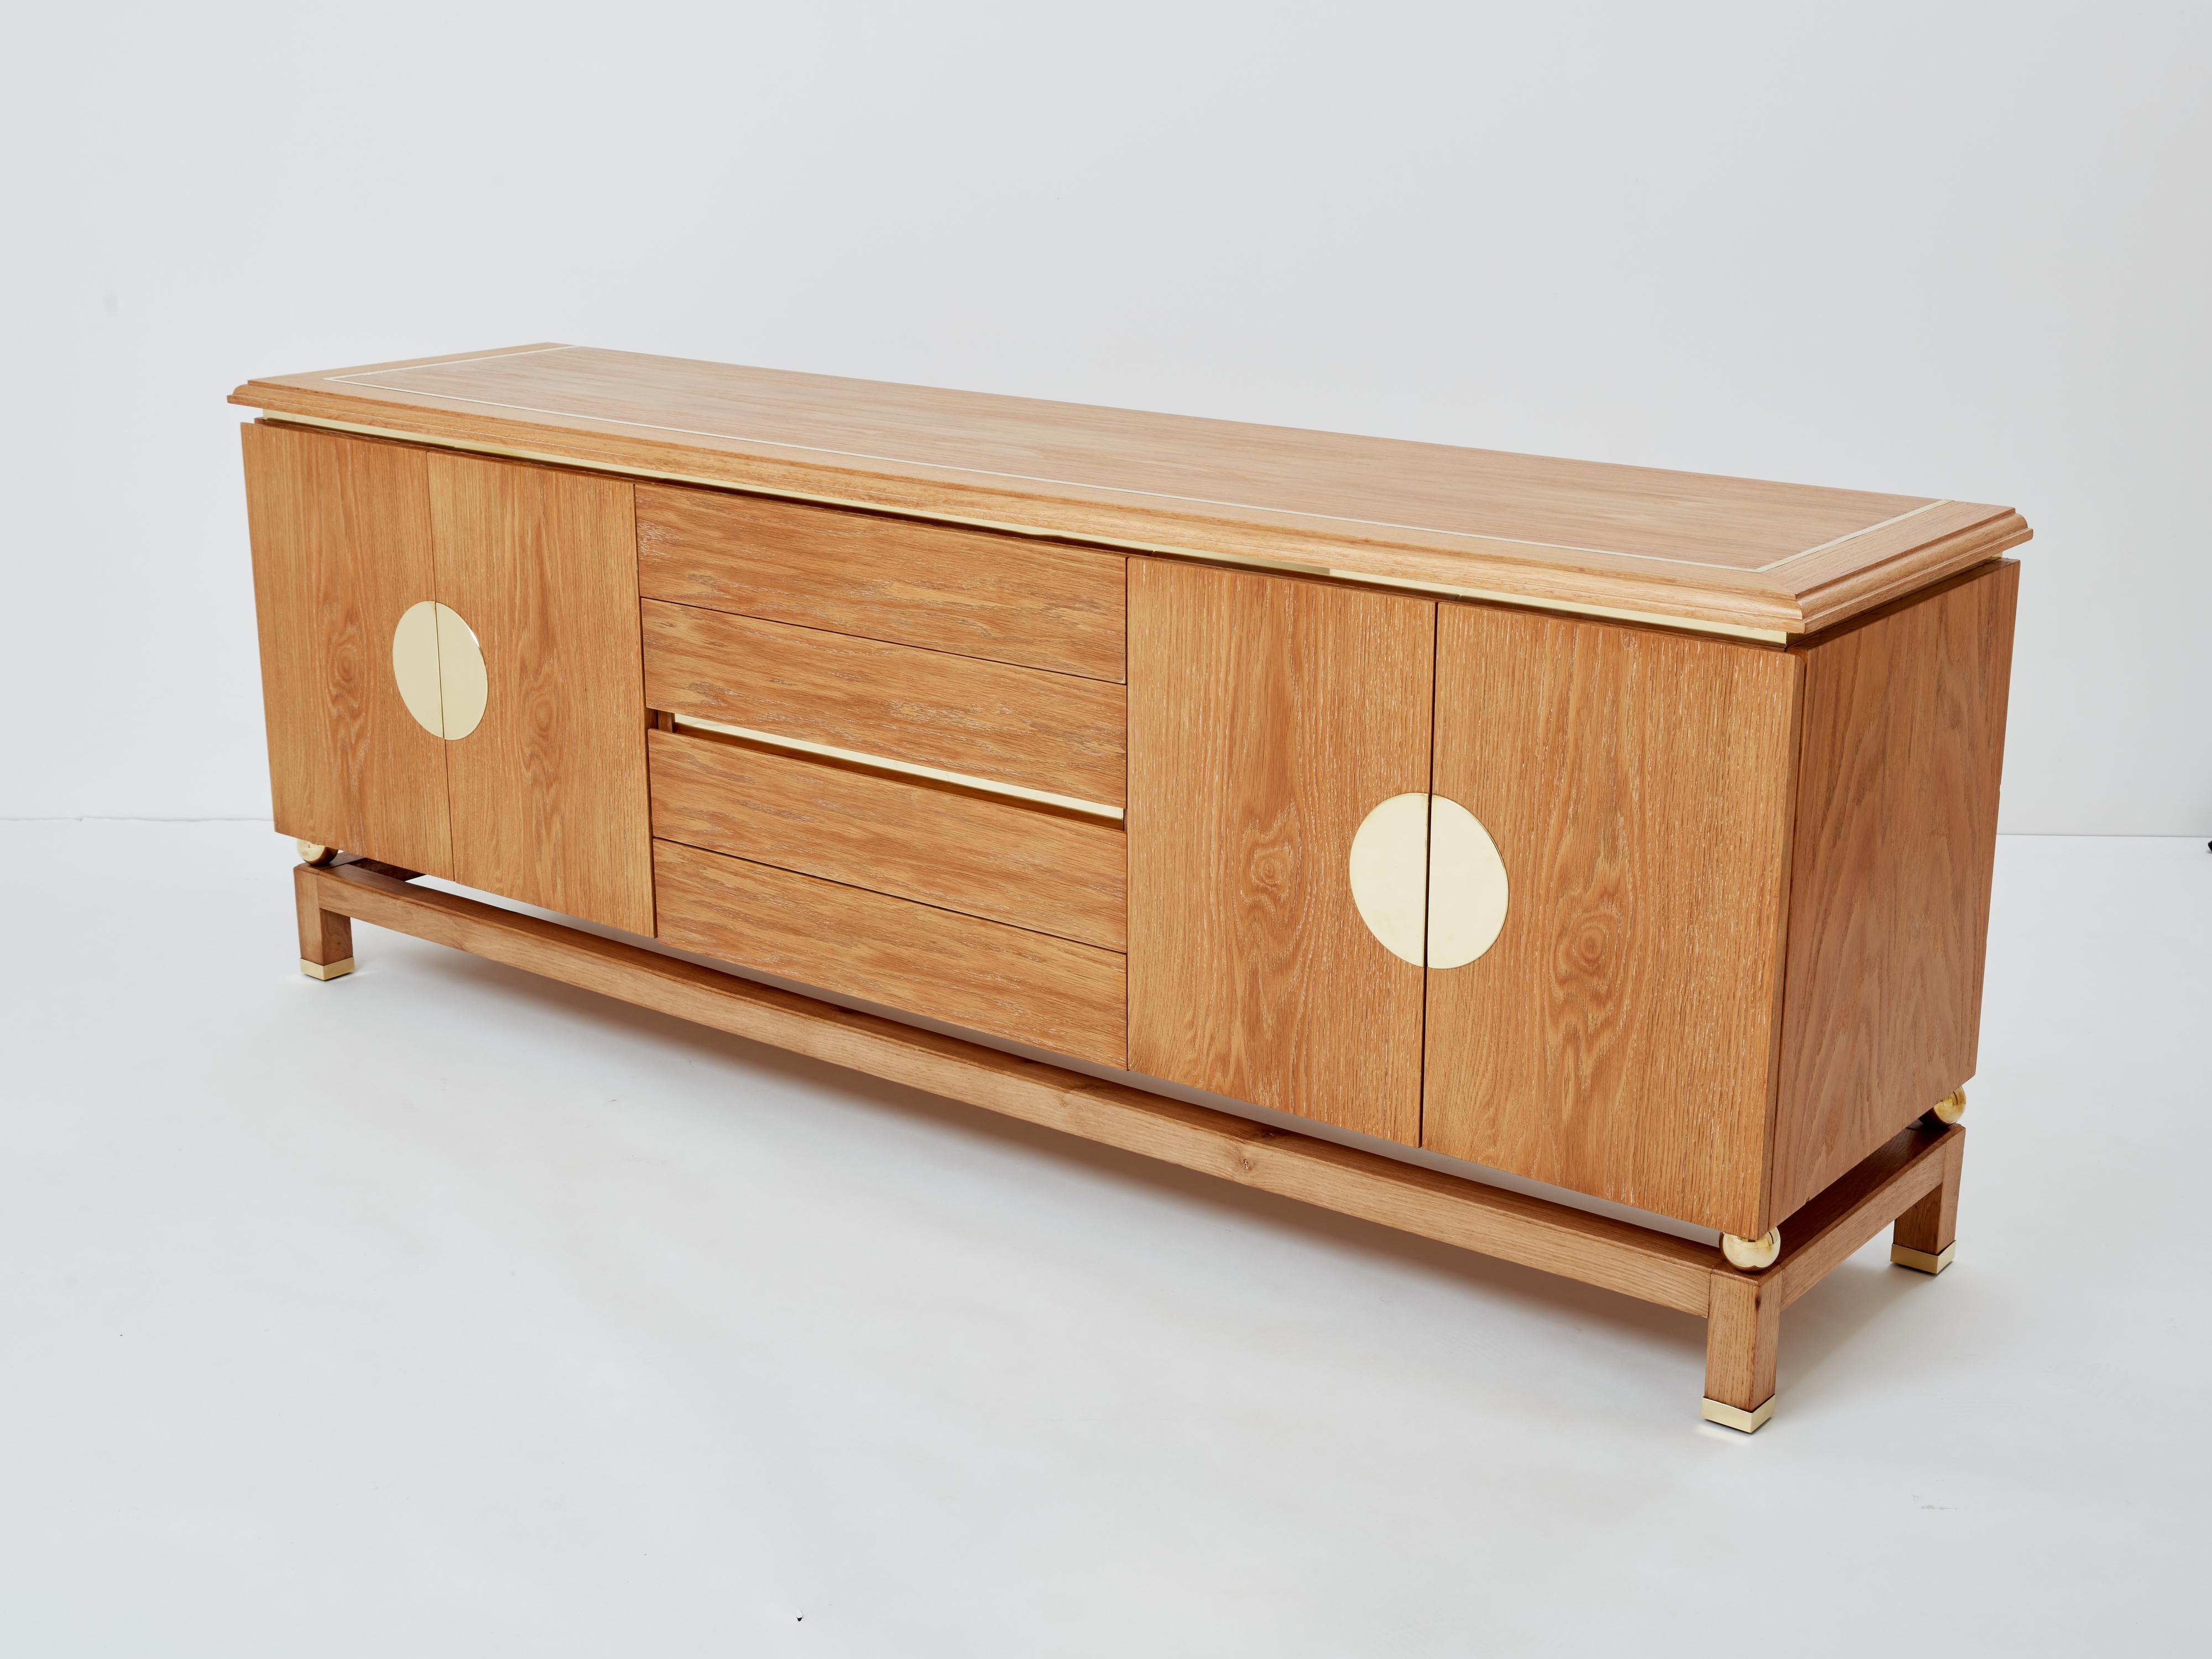 This beautiful cerused oak sideboard was designed by Italian mid-century modern designer Tommaso Barbi in the 1970s. It features four doors and four drawers at its center. Gleaming brass accents, with rounded shape brass inlays on the doors, four